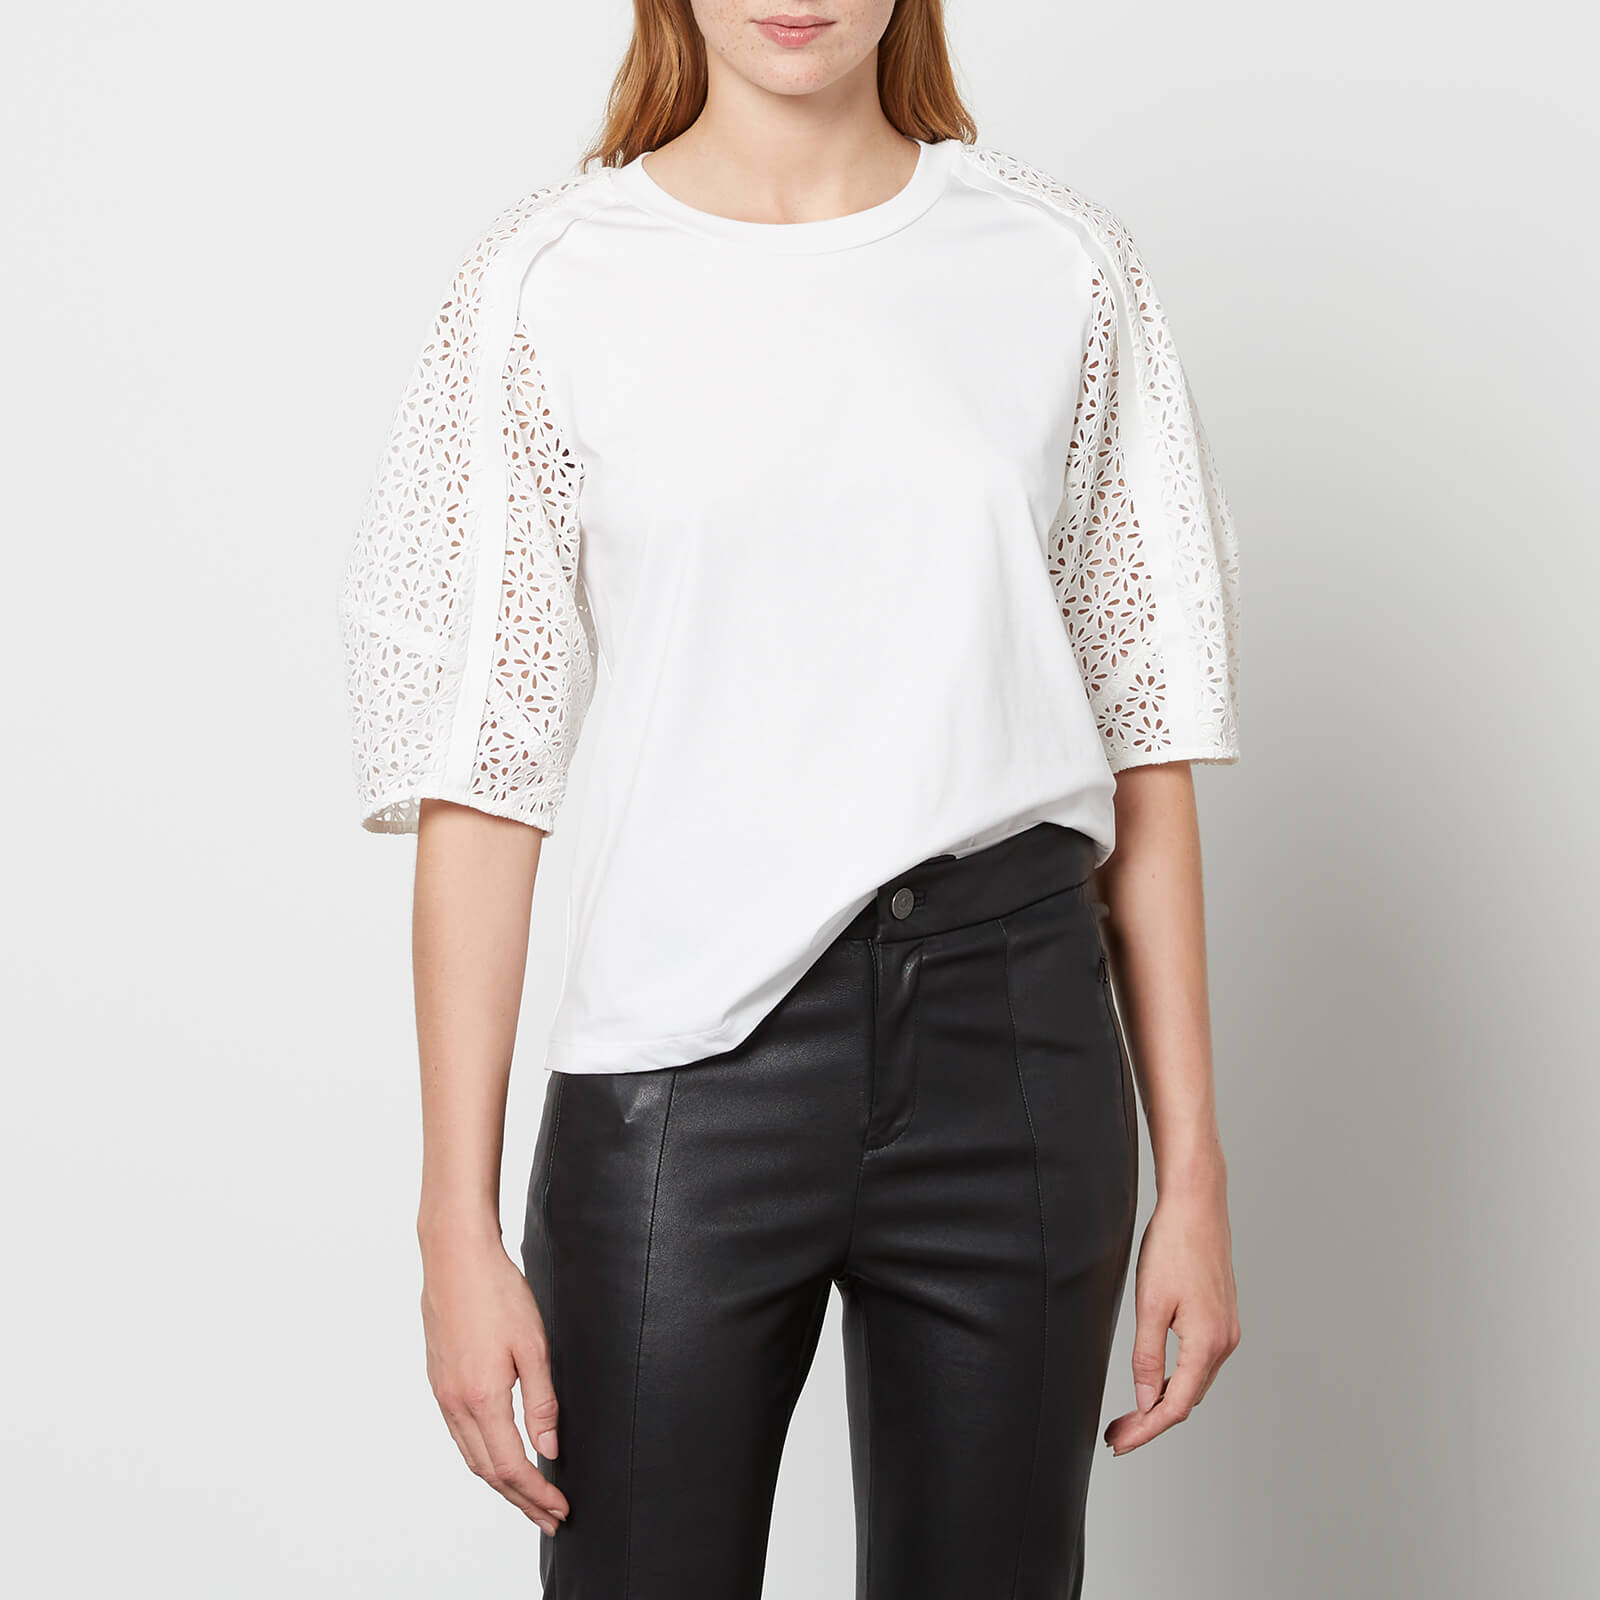 3.1 phillip lim women's broderie anglaise t shirt - white - s